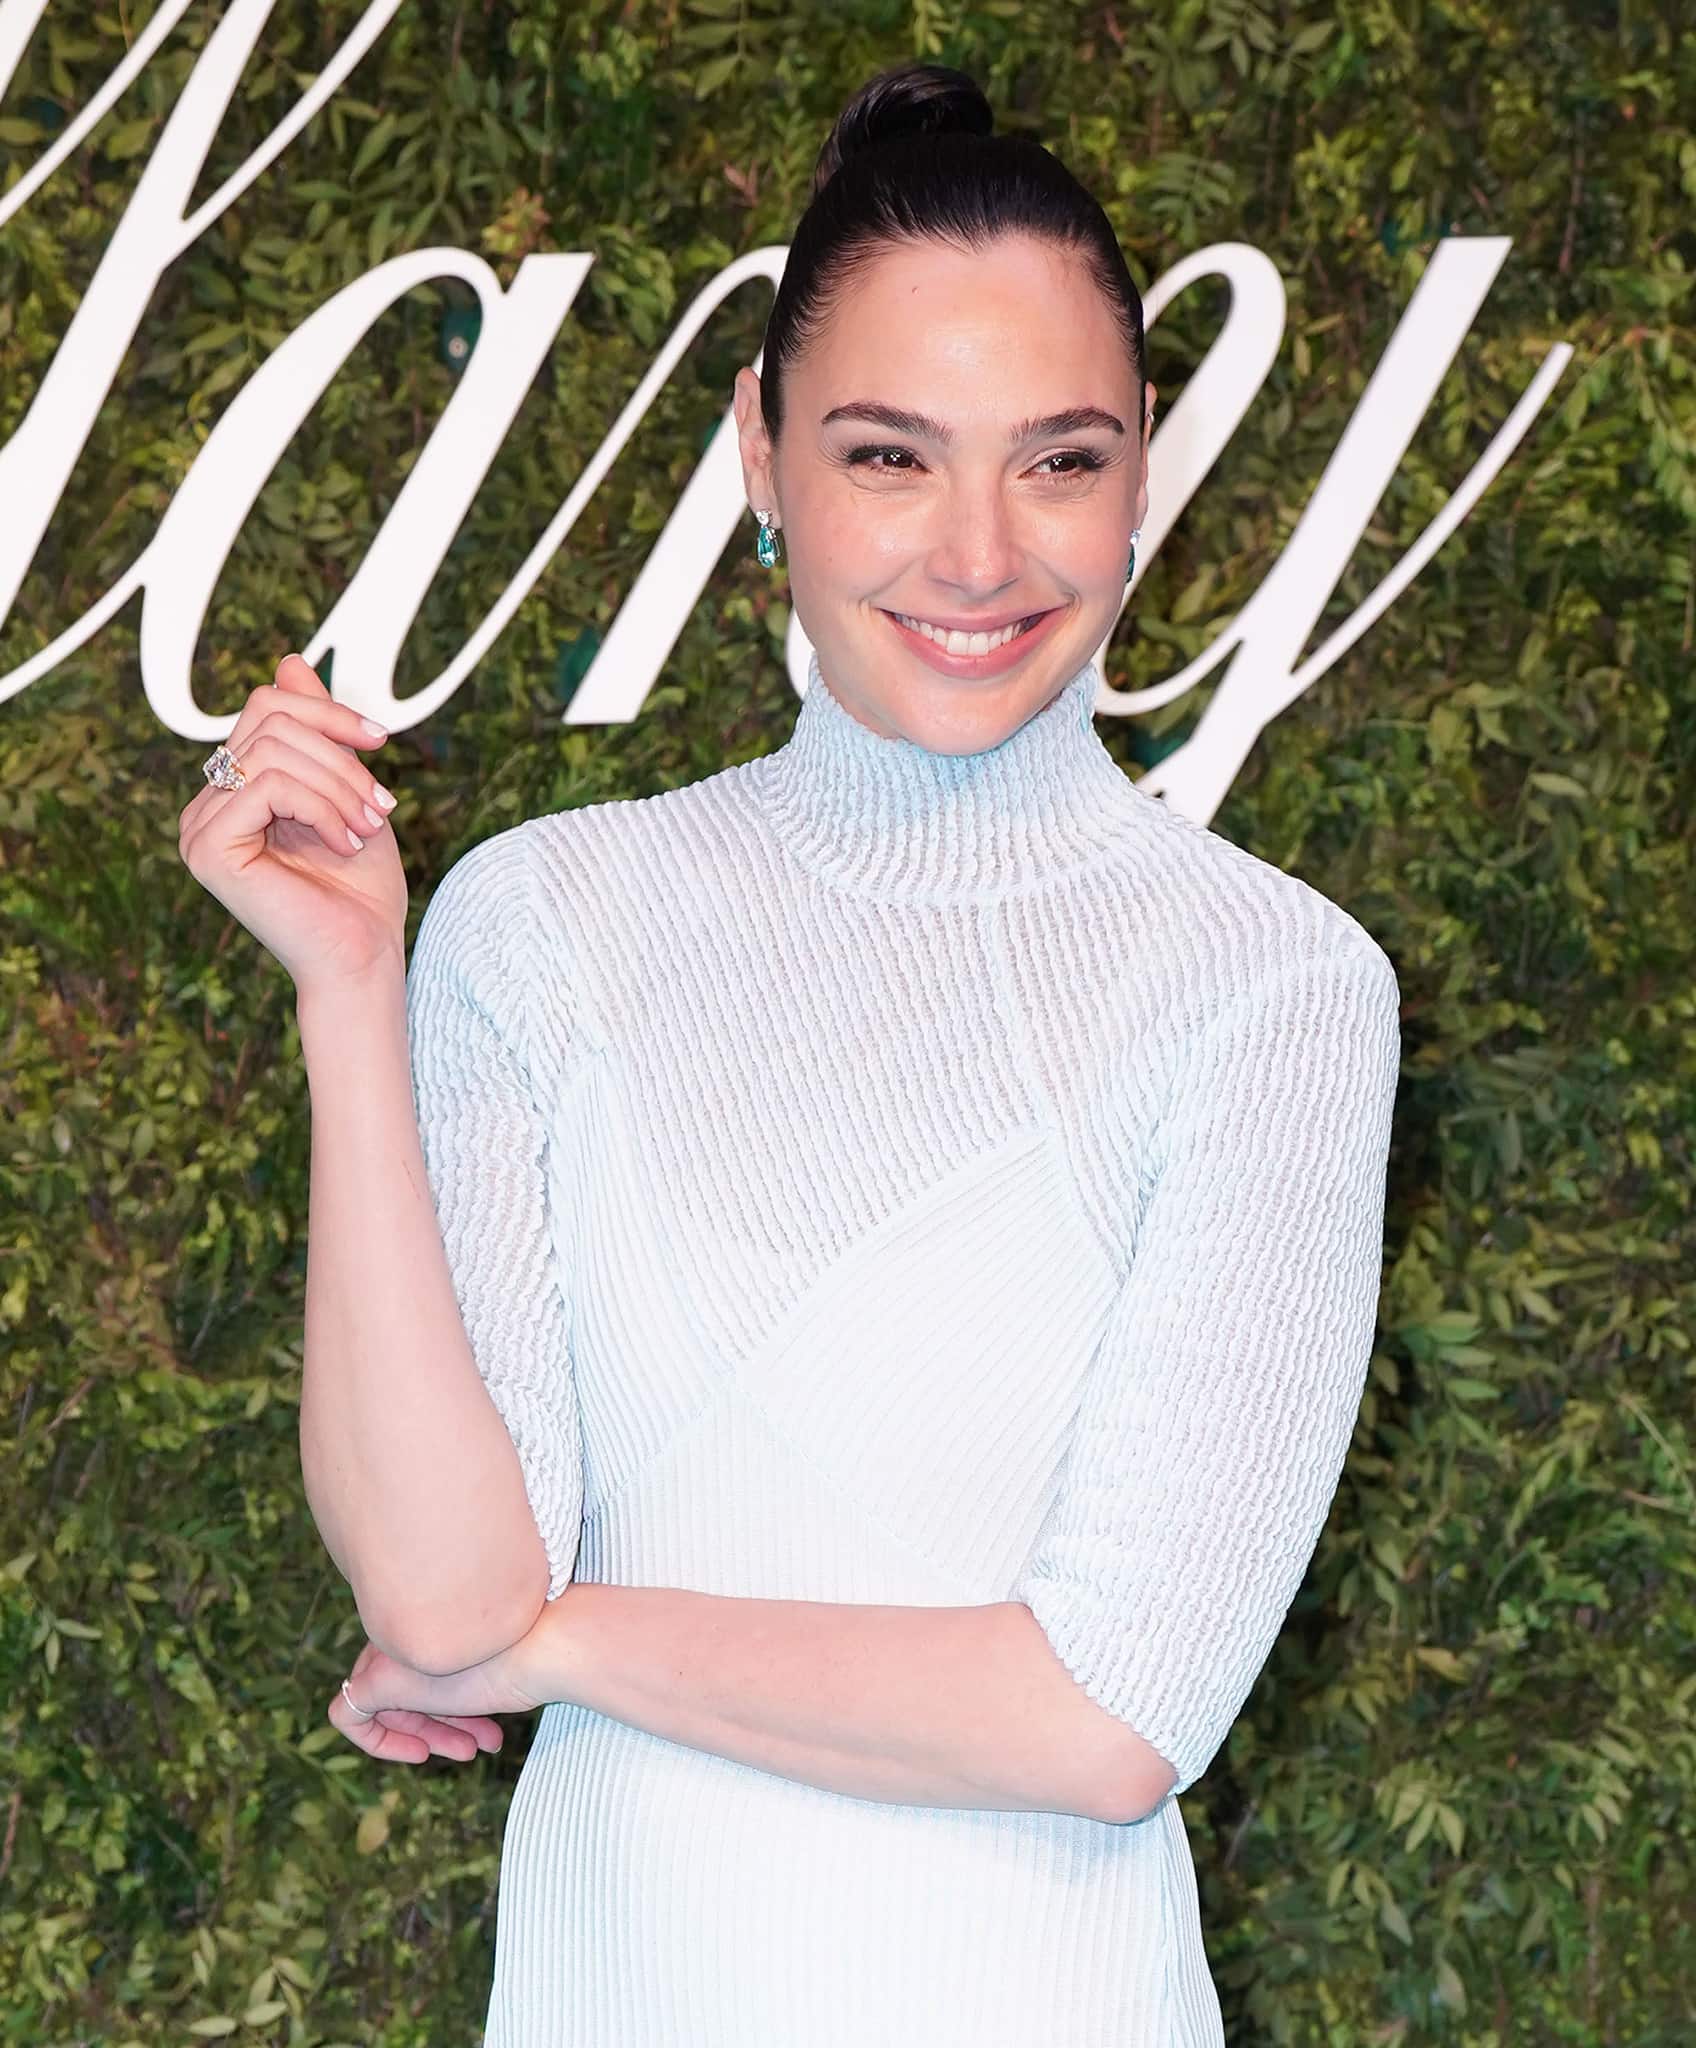 Gal Gadot styles her raven locks up into a neat bun and wears minimal makeup with brushed up brows and pink lip color